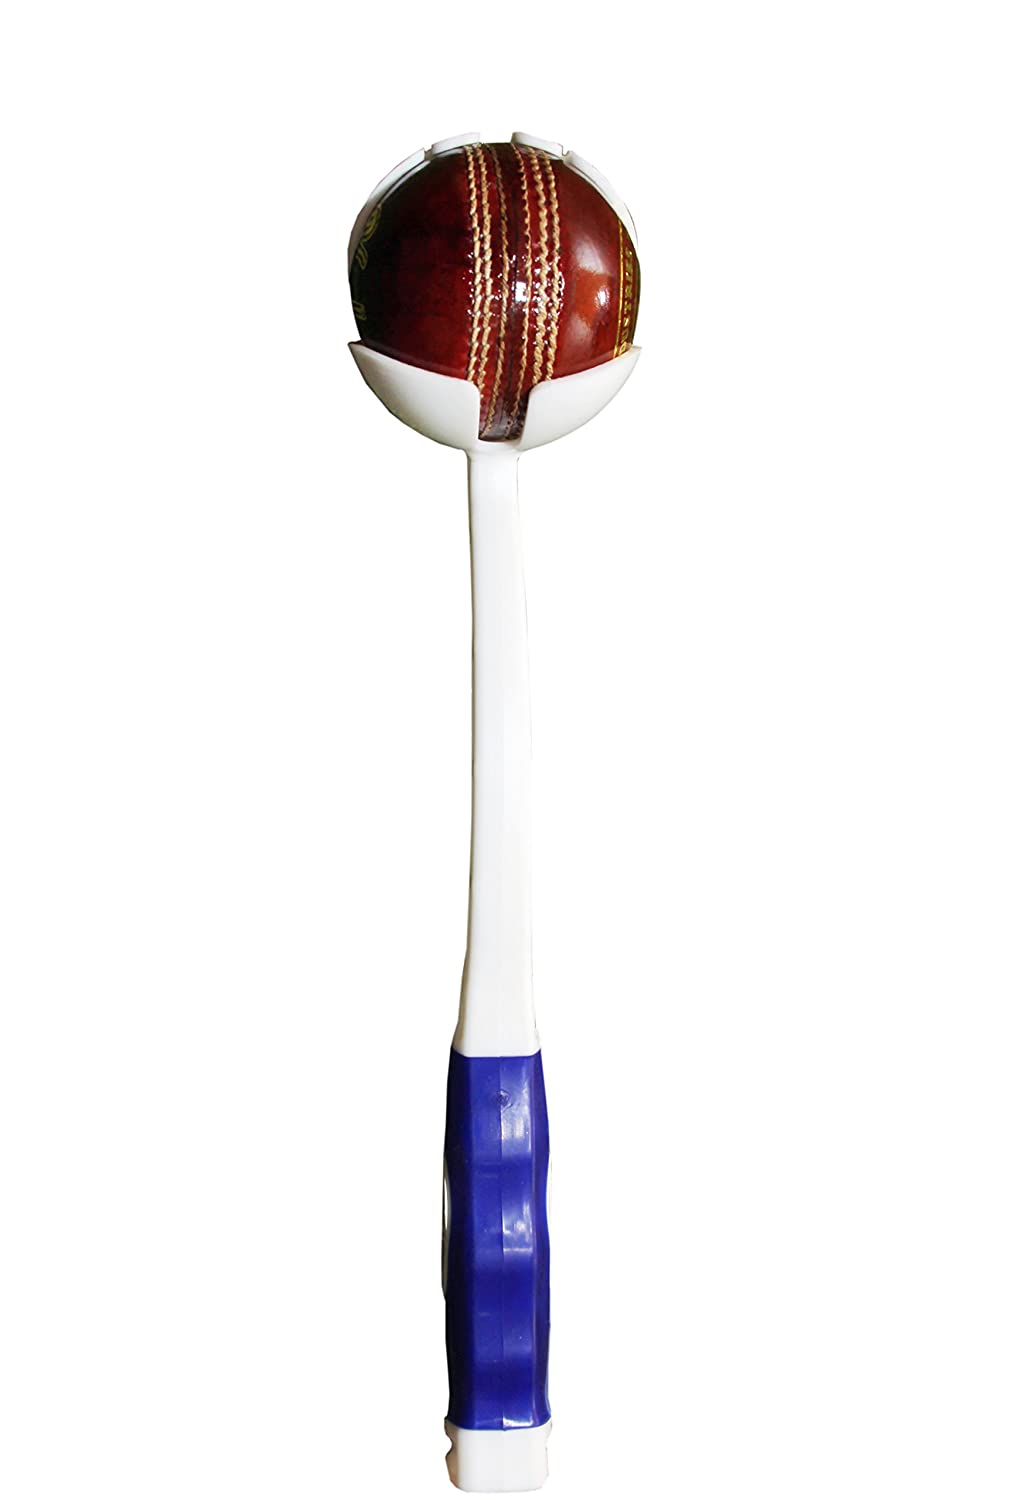 Cricket Ball Thrower Leather Ball Thrower Blue Bowling Thrower Machines pack of1